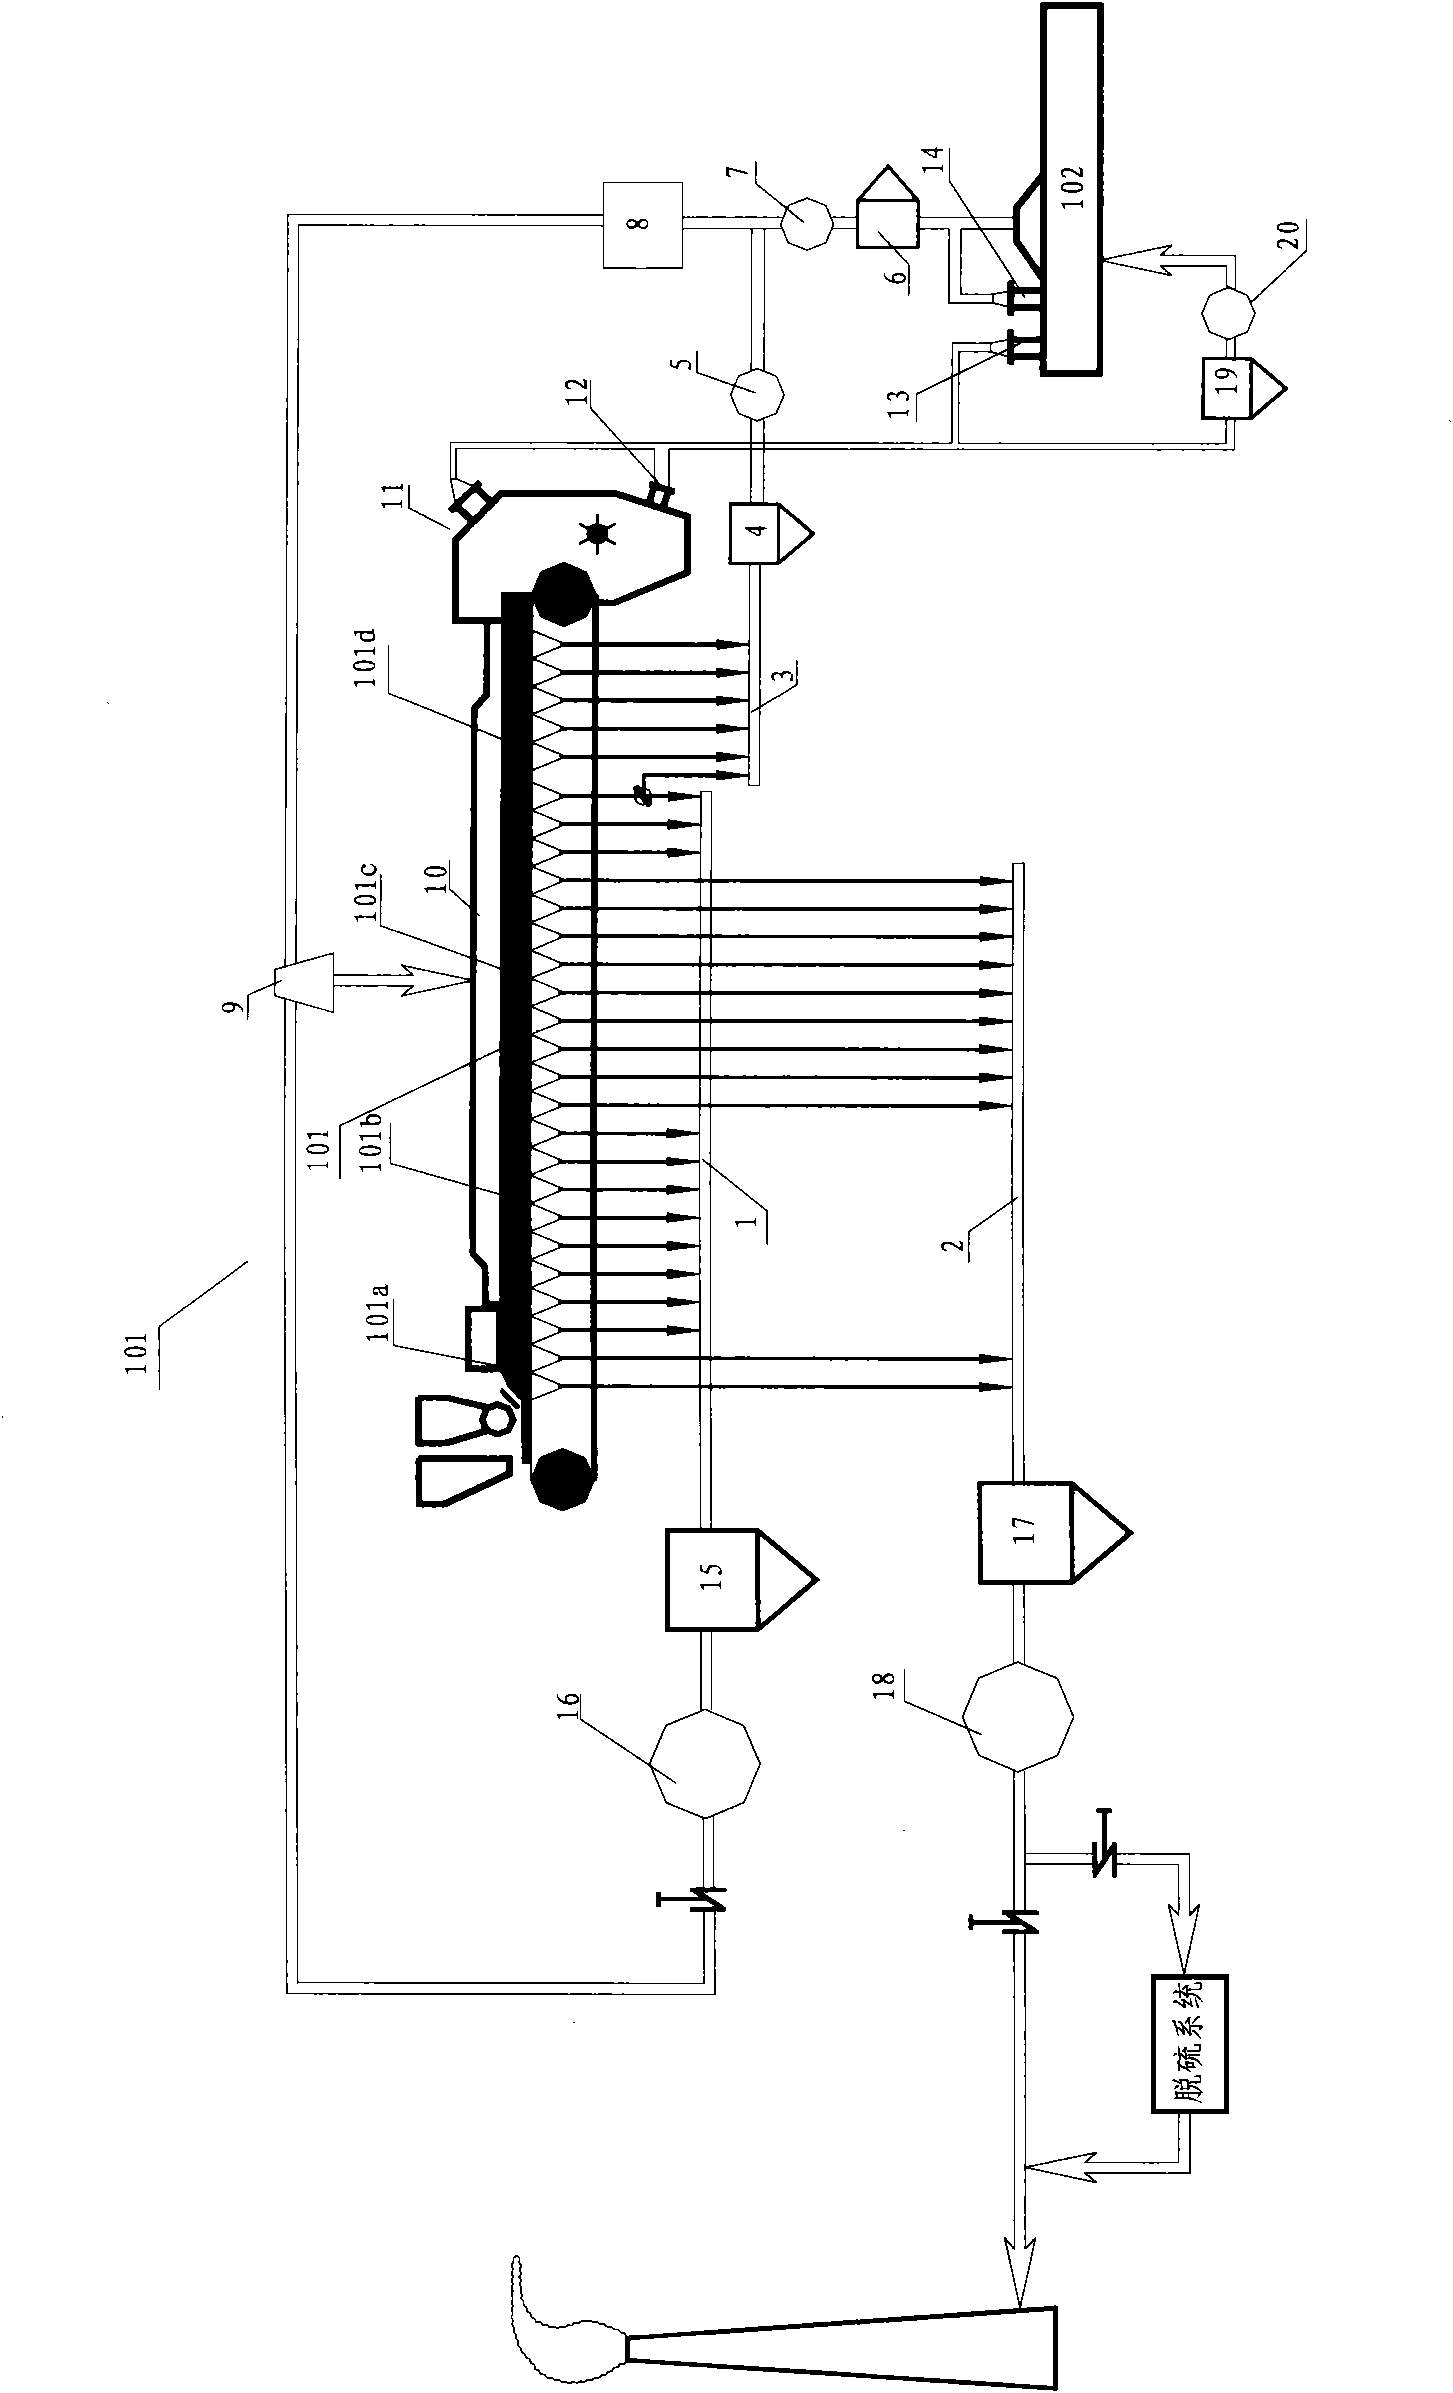 Method for treating smoke generated by sintering ore materials